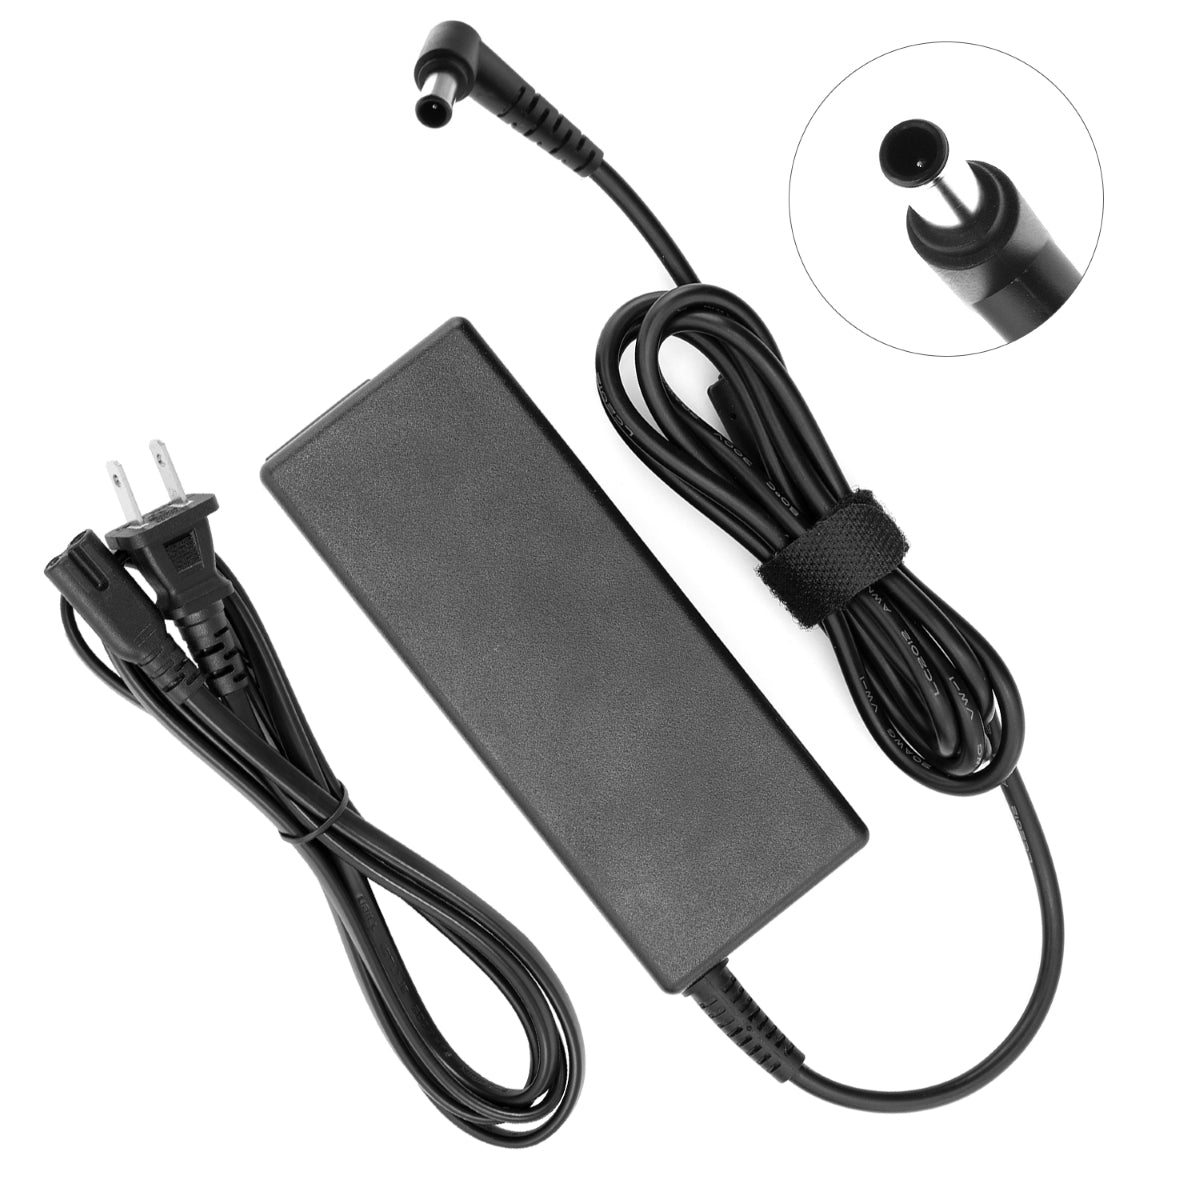 Compatible Charger for Sony Vaio VGN-NR160E